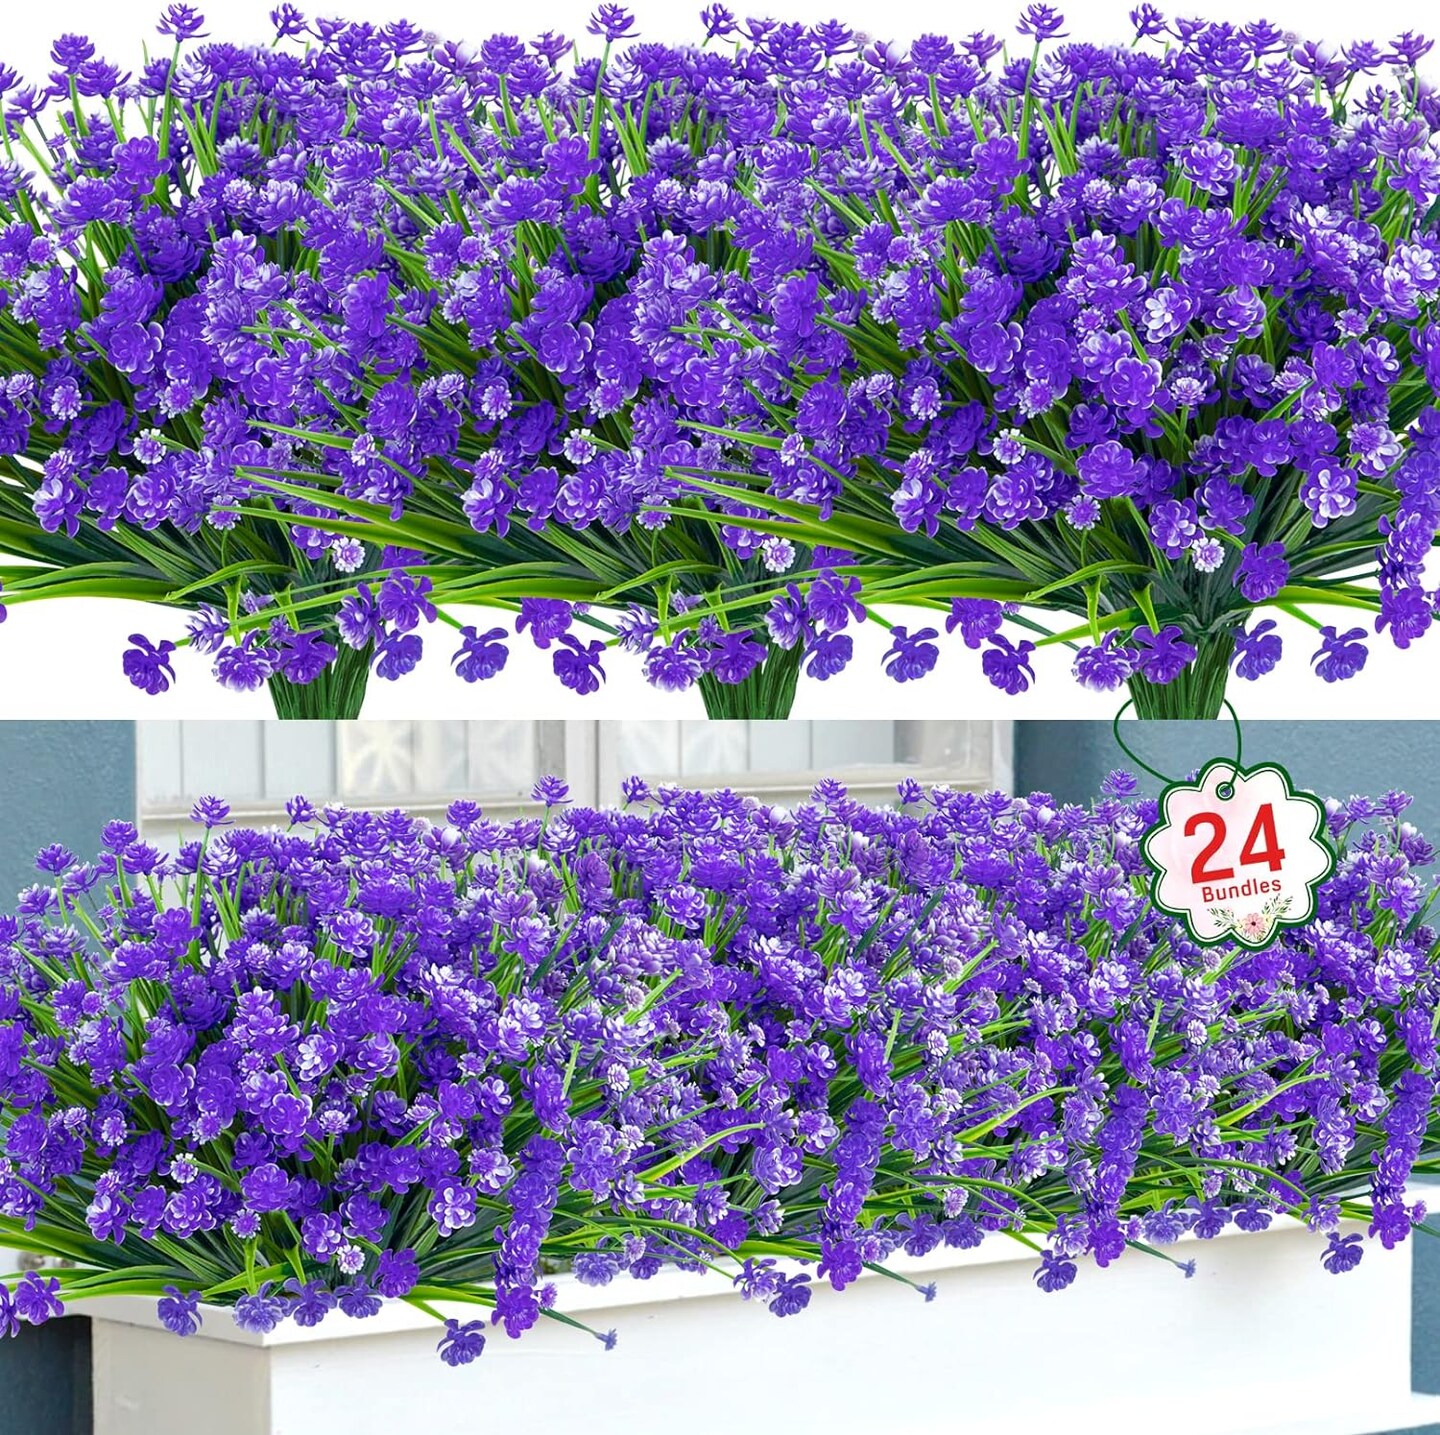 24 bundles of artificial flowers for outdoor decorations. Fake Plastic Plants Artificial Greenery for Spring Summer Indoor Outdoor Garden Patio Window Box Kitchen Home Decor in Purple